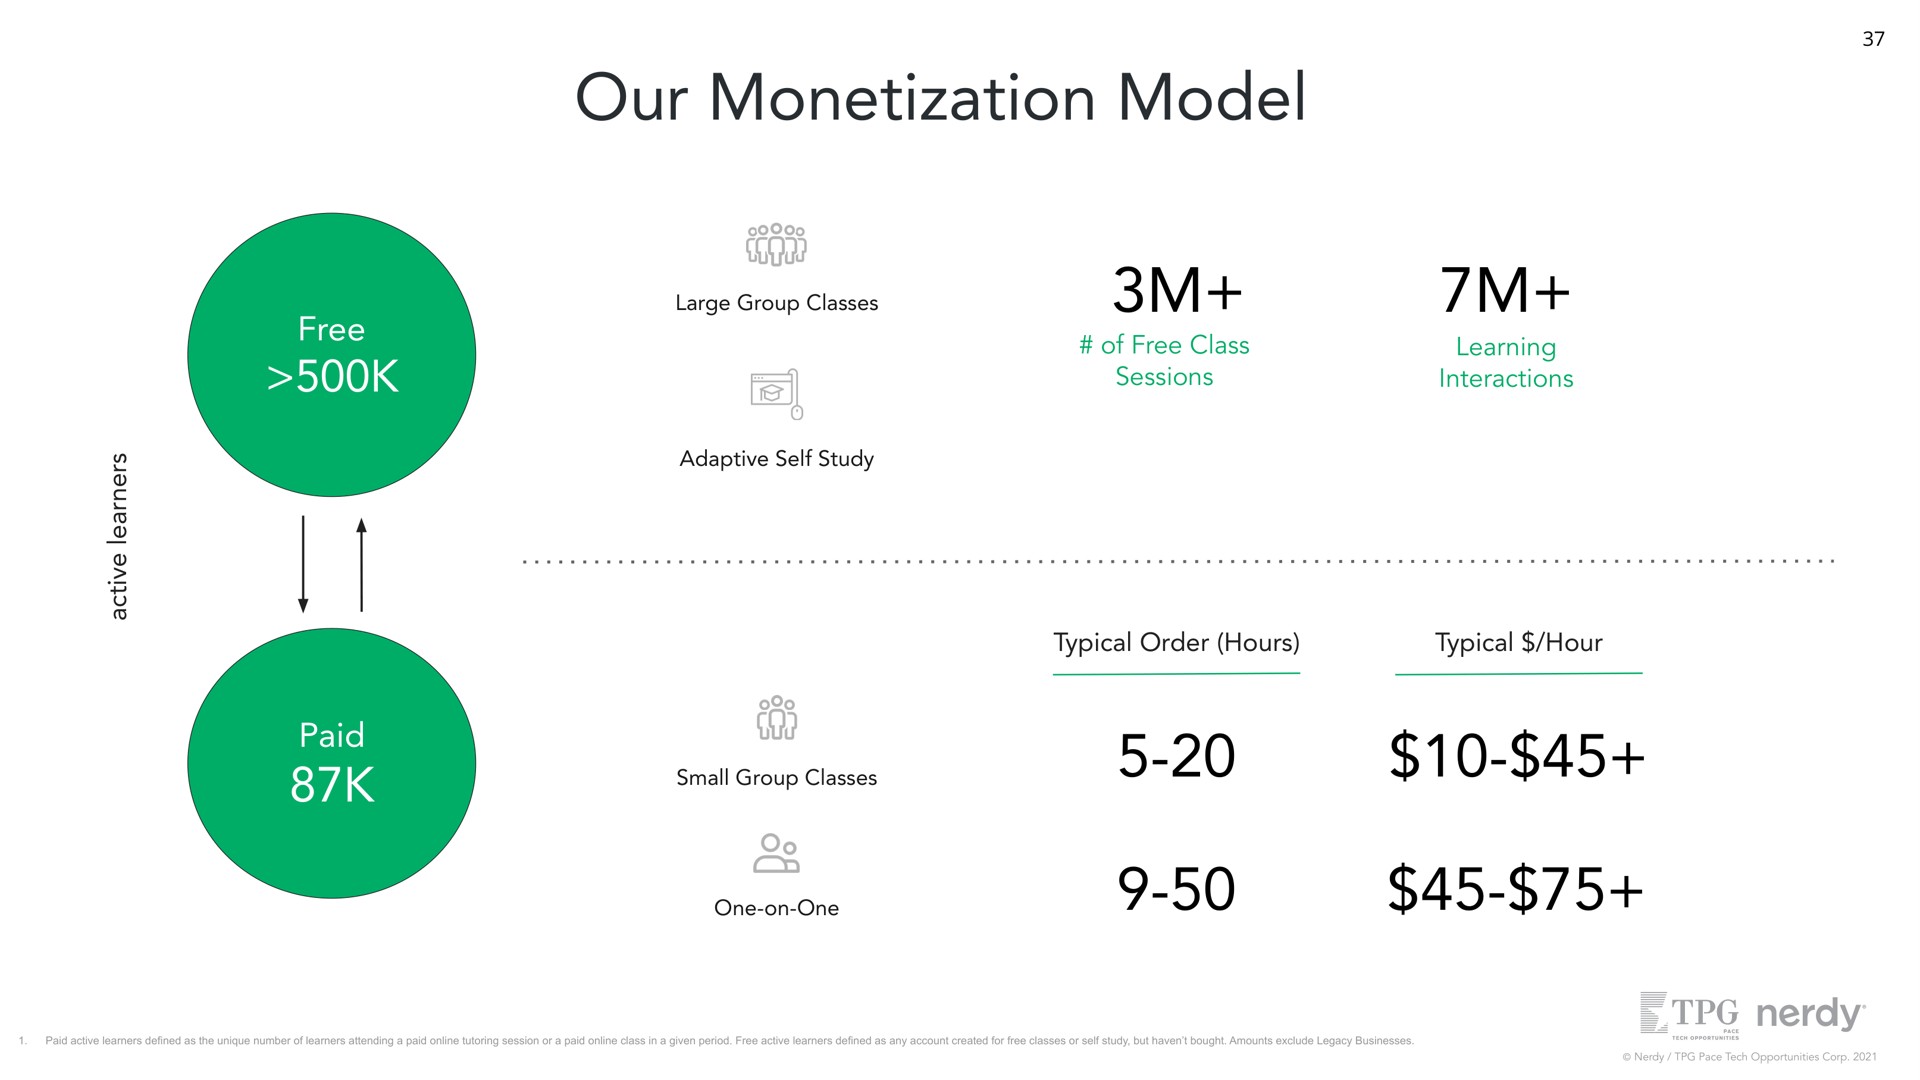 our monetization model free large group classes adaptive self study of free class sessions learning interactions typical order hours typical hour paid small group classes one on one ores | Nerdy